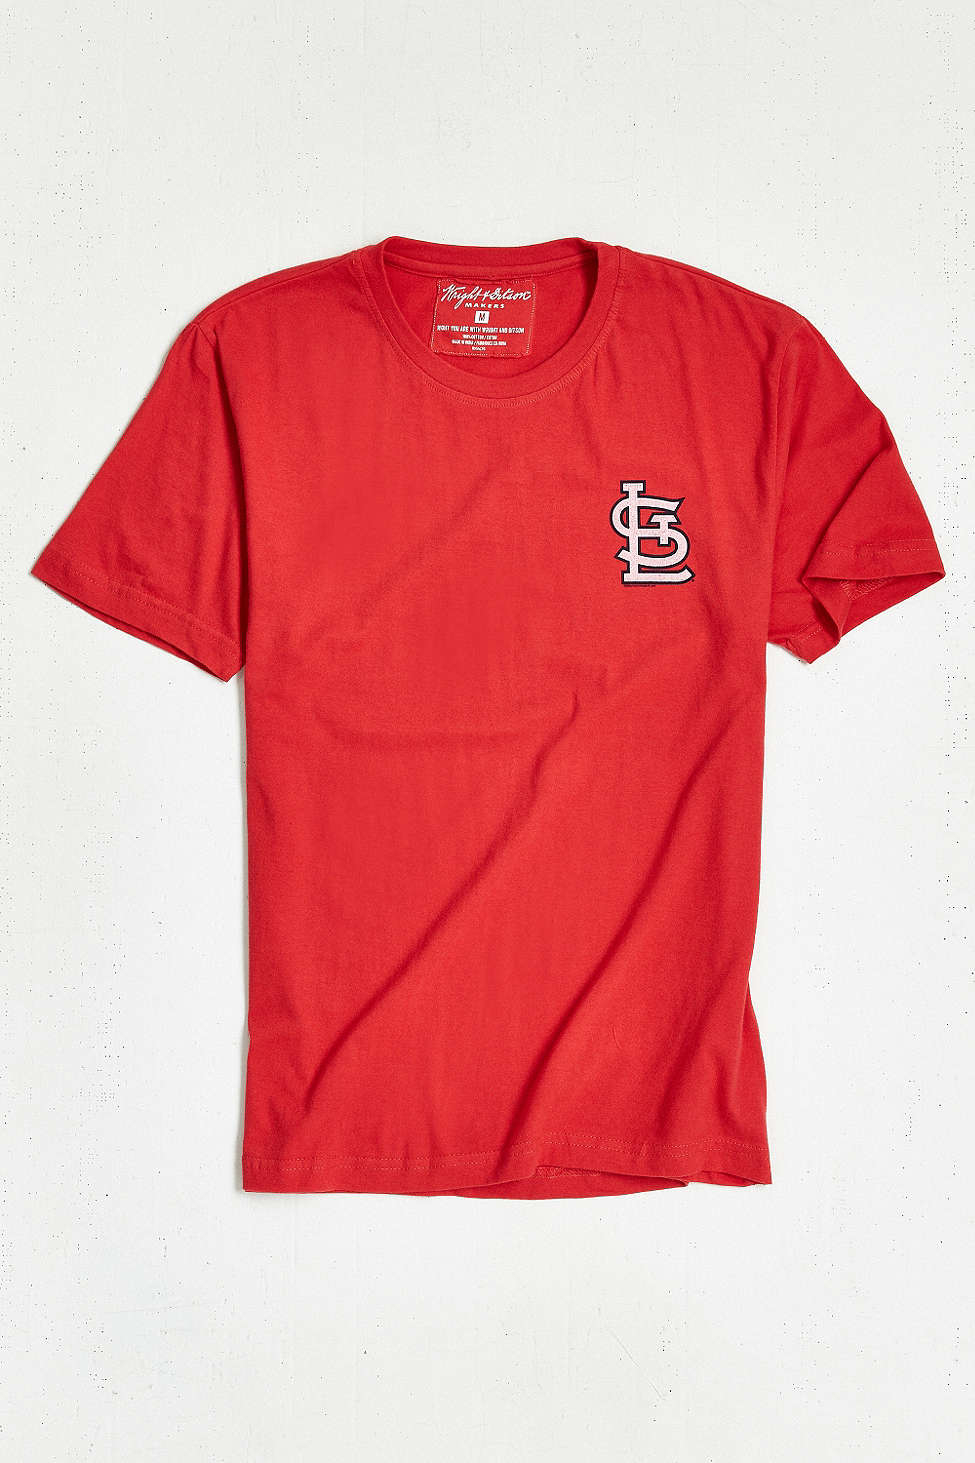 Lyst - Urban Outfitters St. Louis Cardinals 2016 Tee in Red for Men